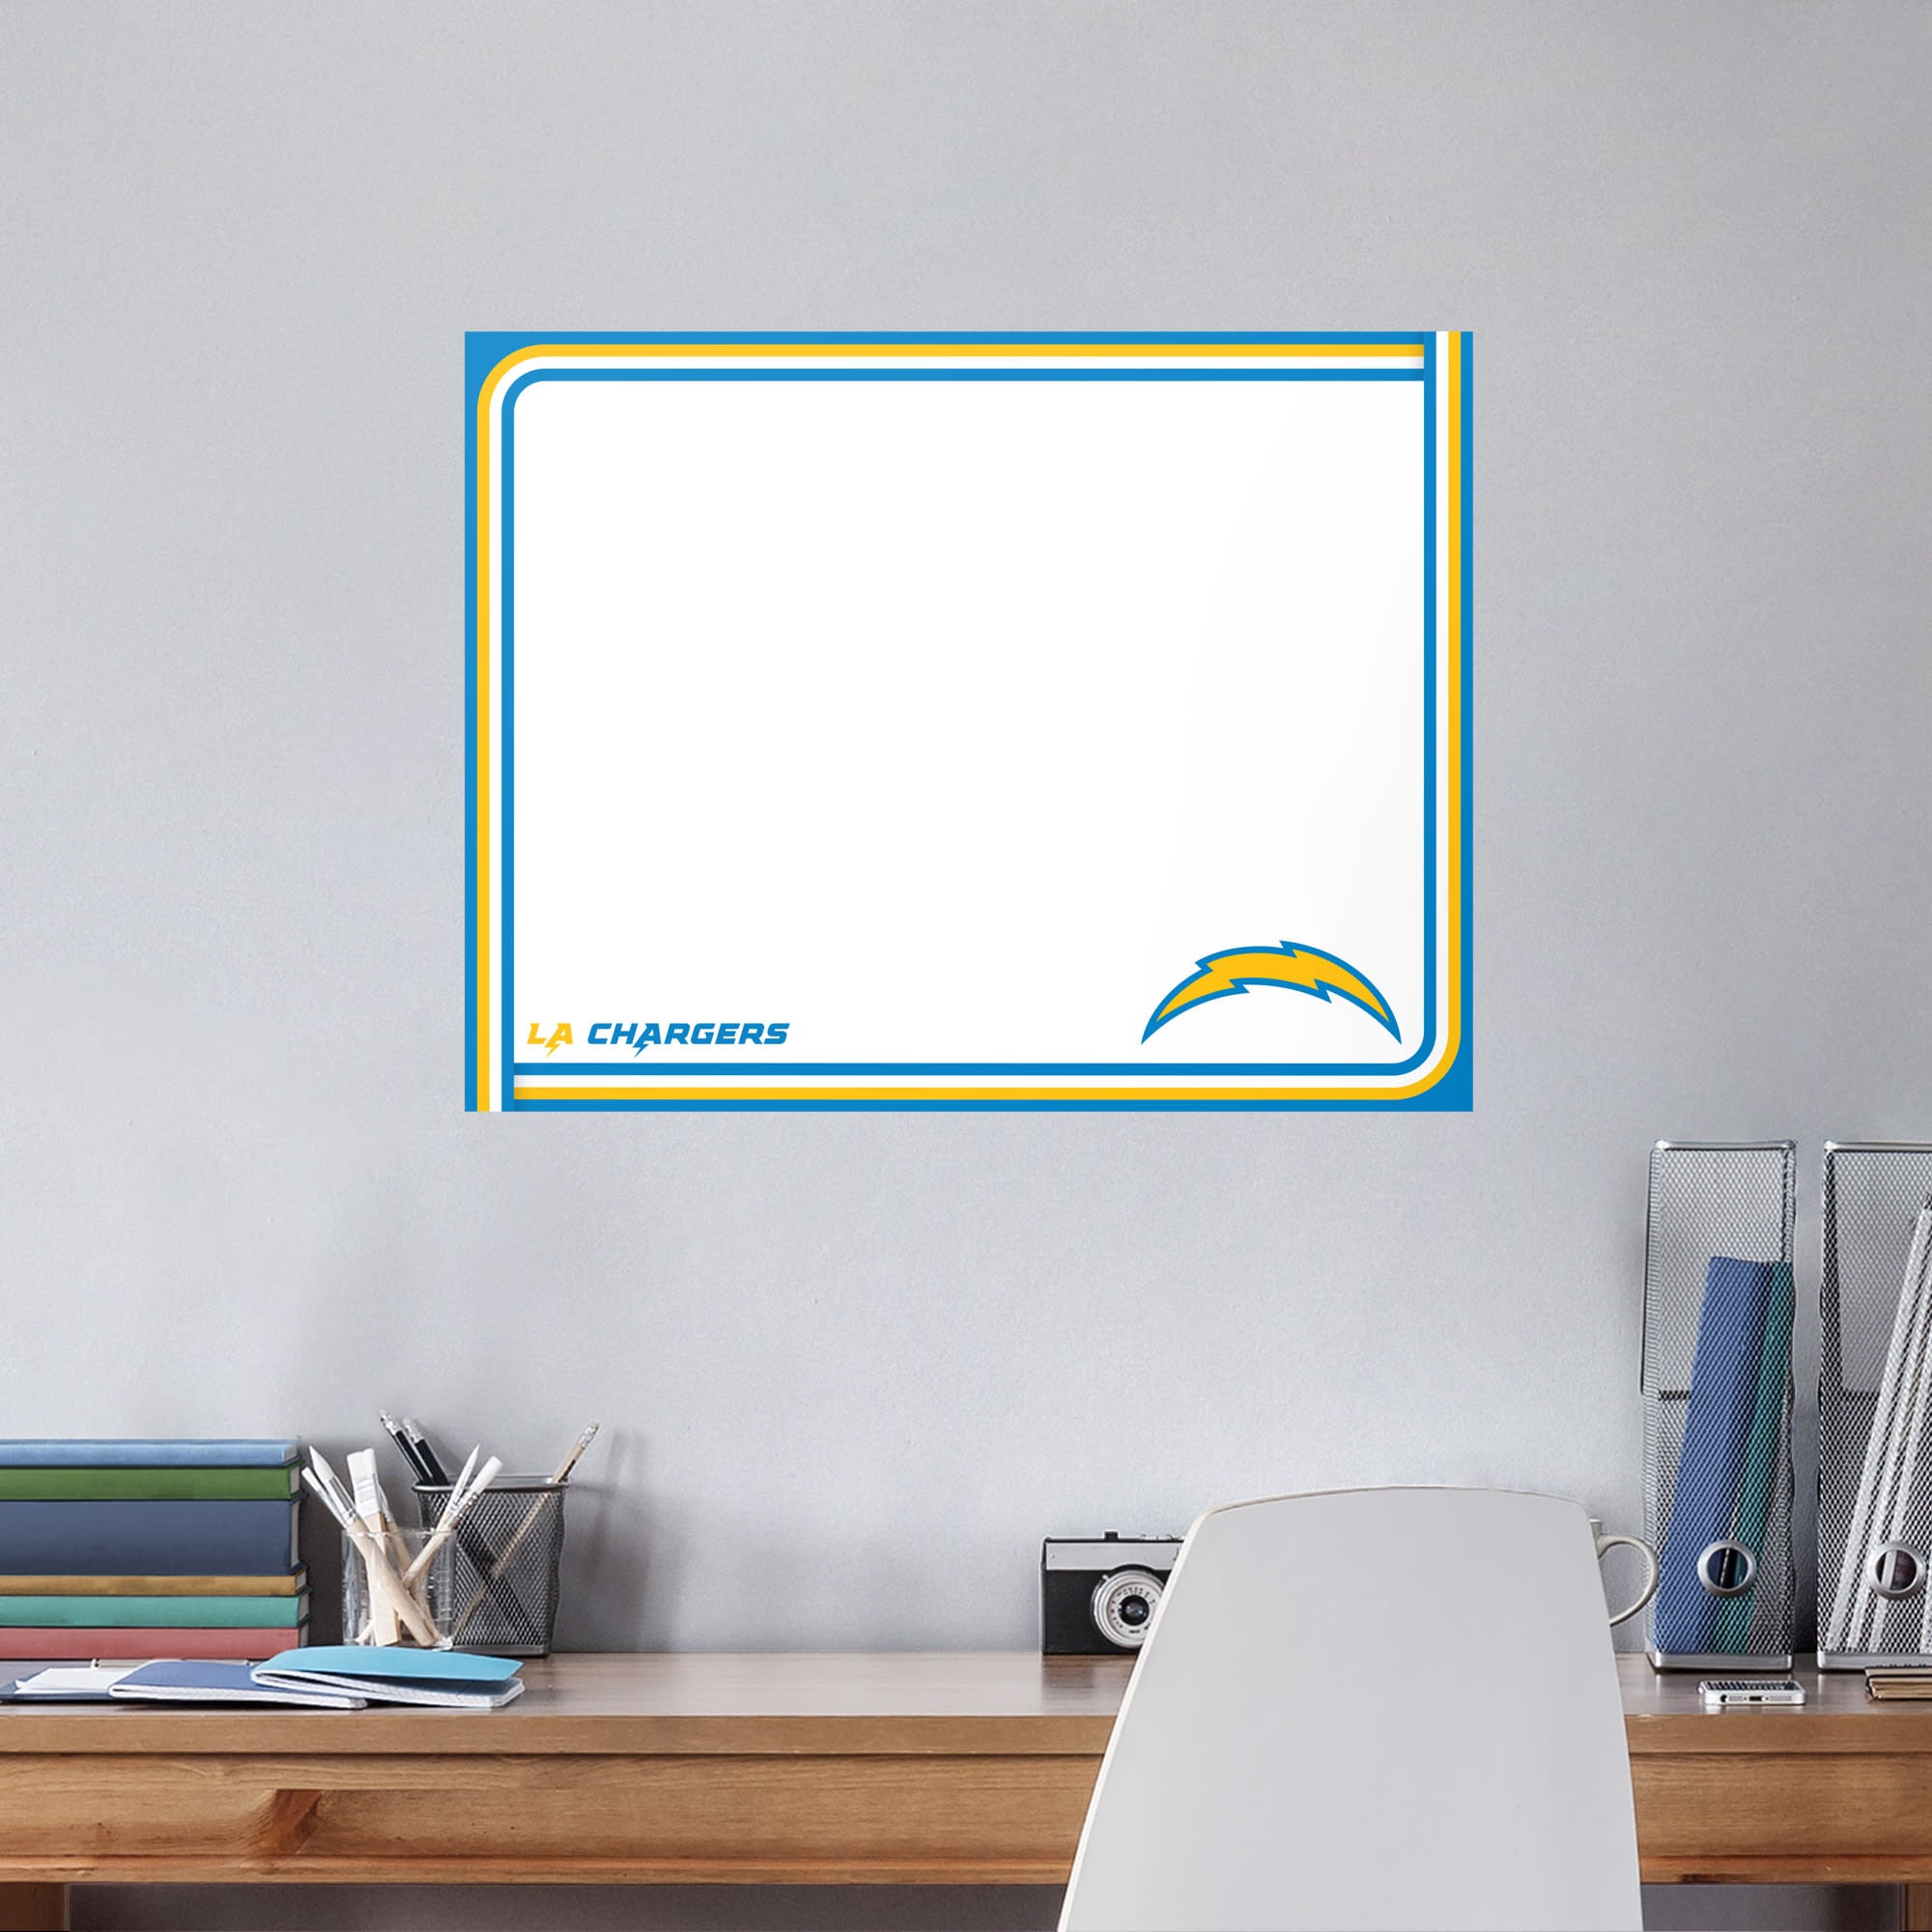 Los Angeles Chargers: Dry Erase Whiteboard - Officially Licensed NFL Removable Wall Decal XL by Fathead | Vinyl